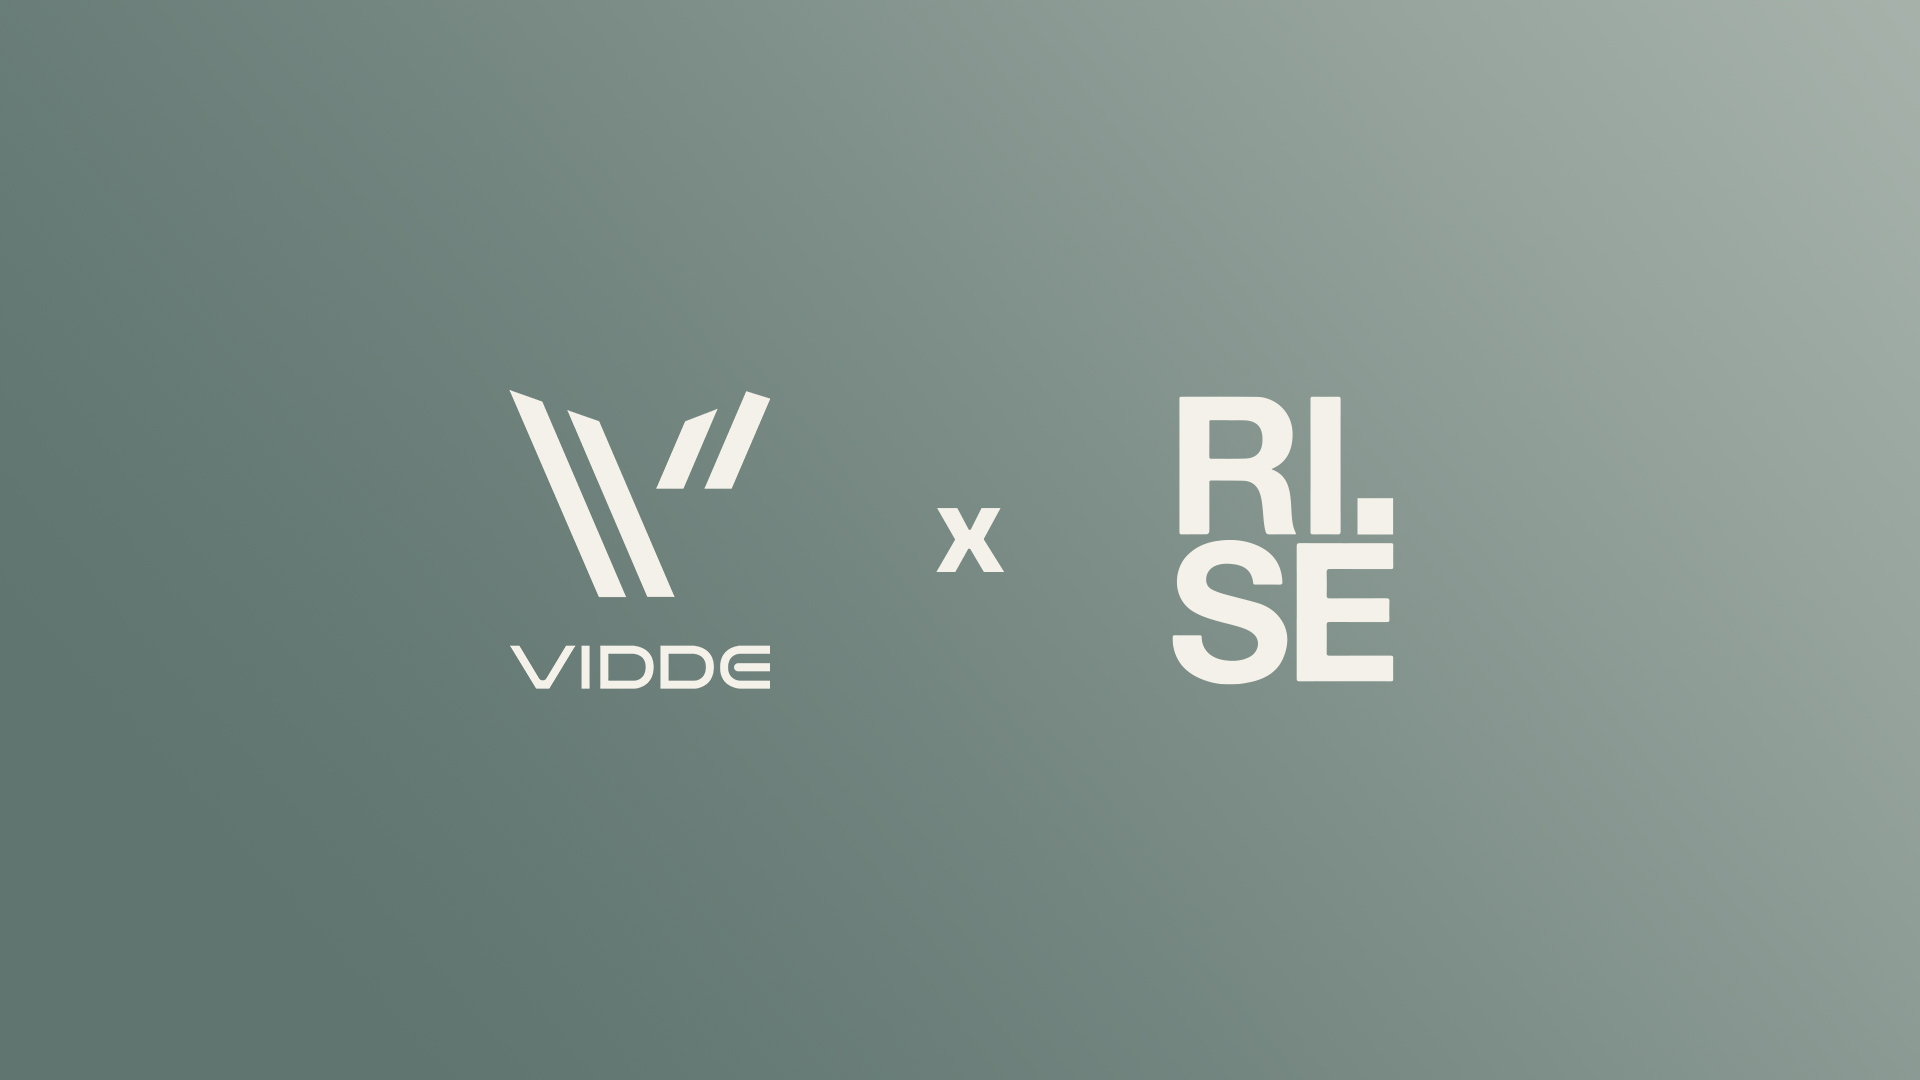 Who is the best partner to make Vidde become a reality – RISE of course